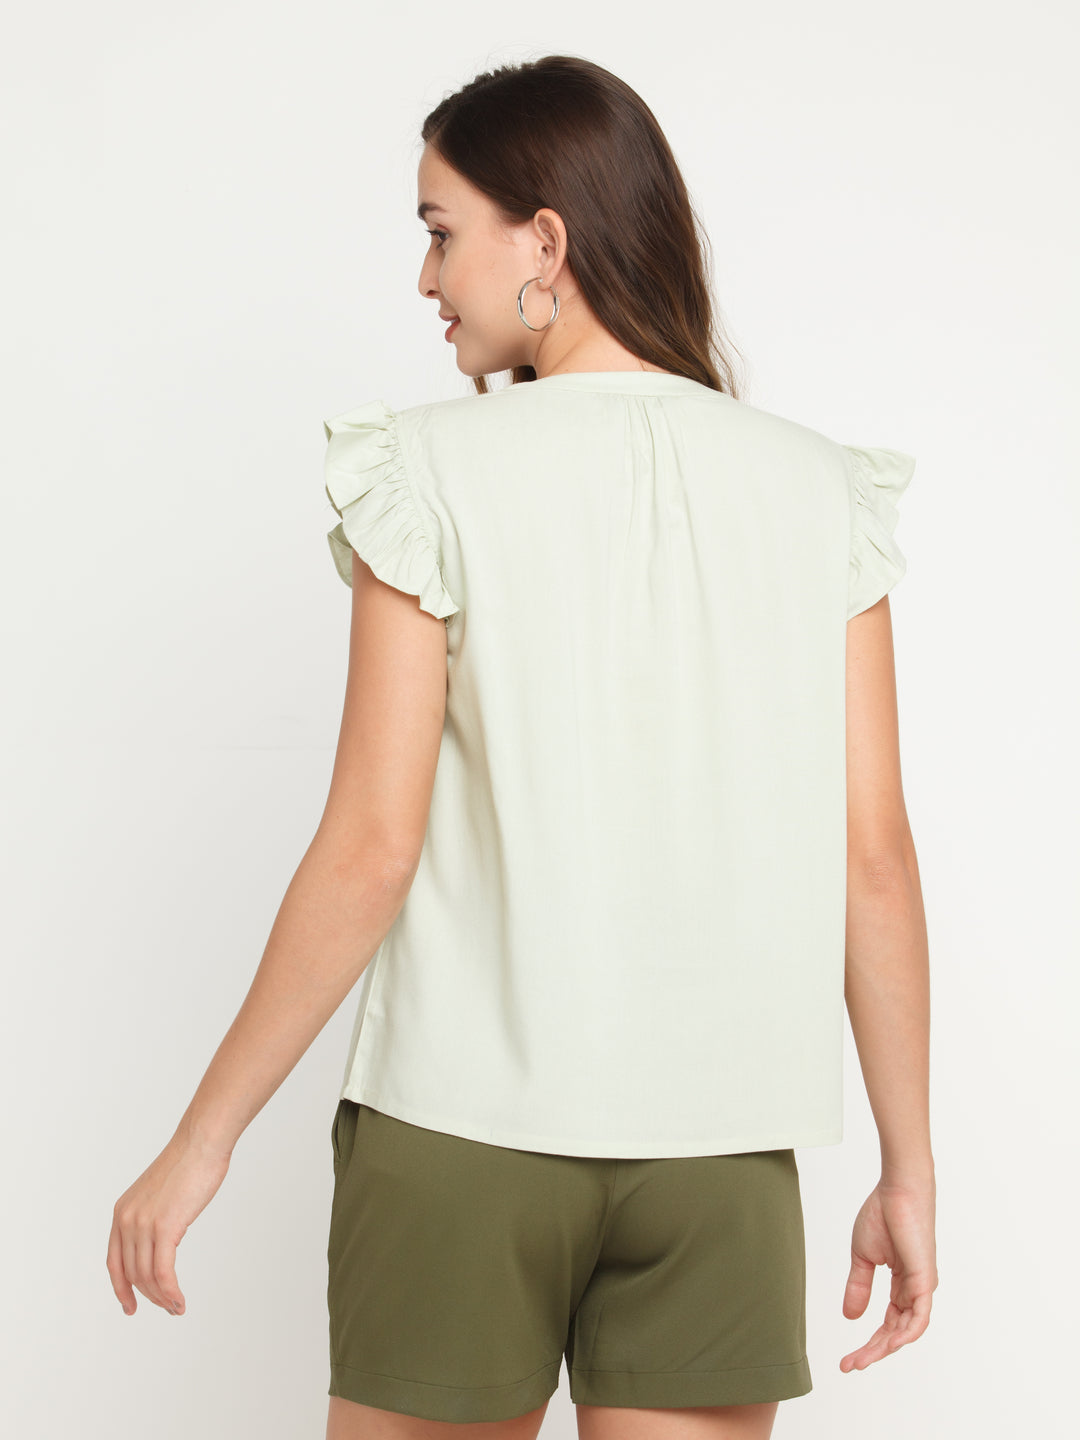 Green Solid Gathered Top For Women